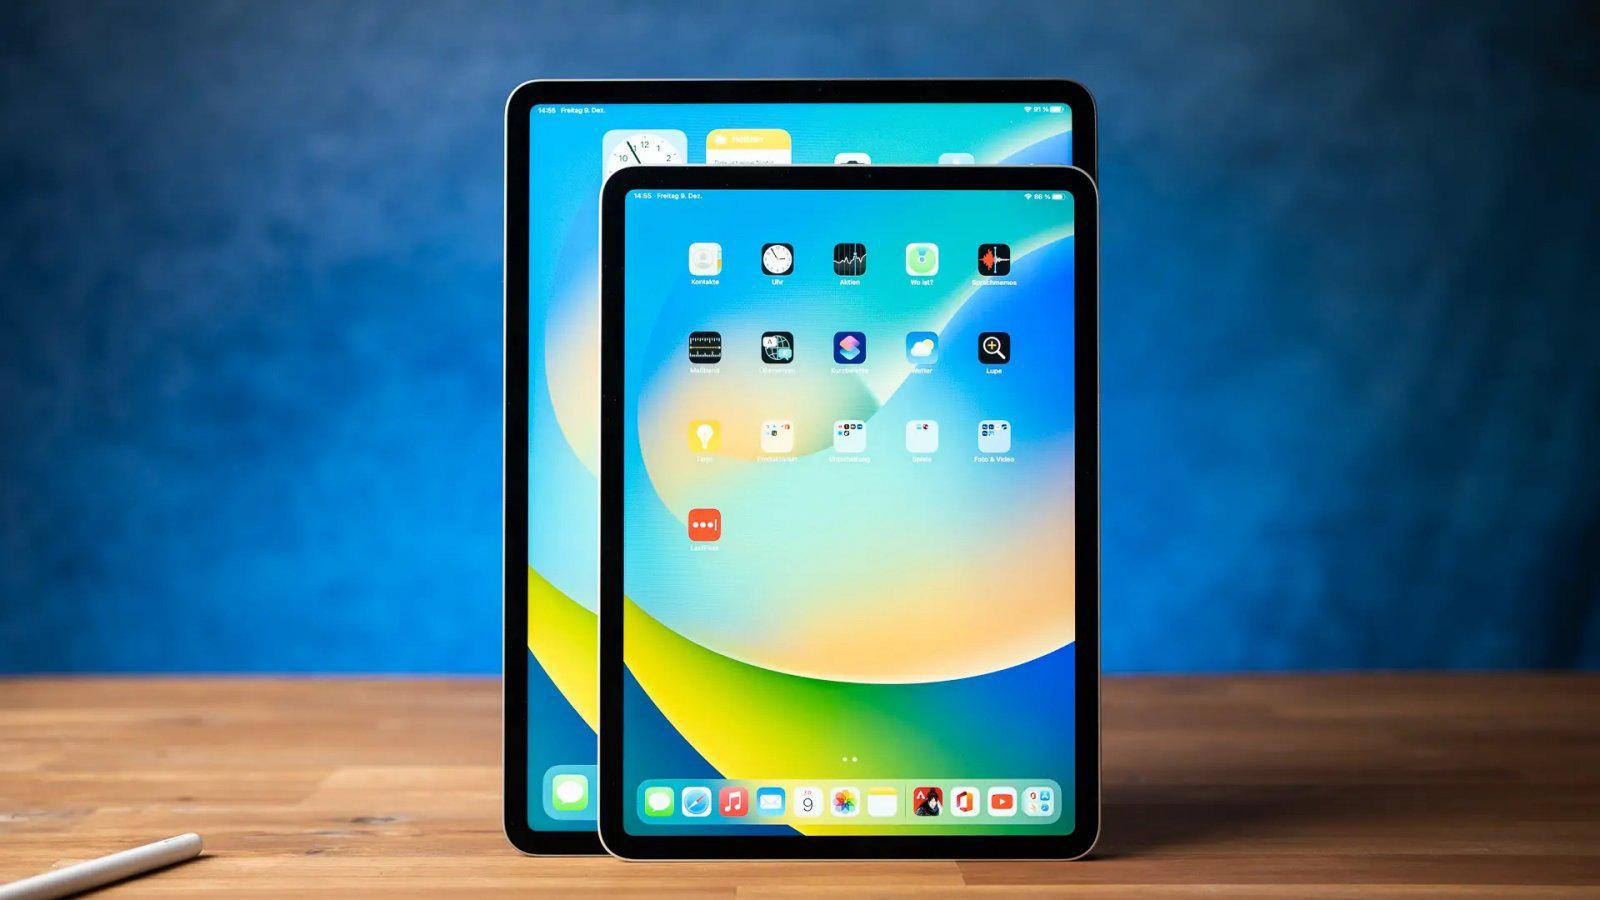 Apple’s Upcoming iPad Pro and Air Models Set to Revolutionize Display Technology with OLED Screens